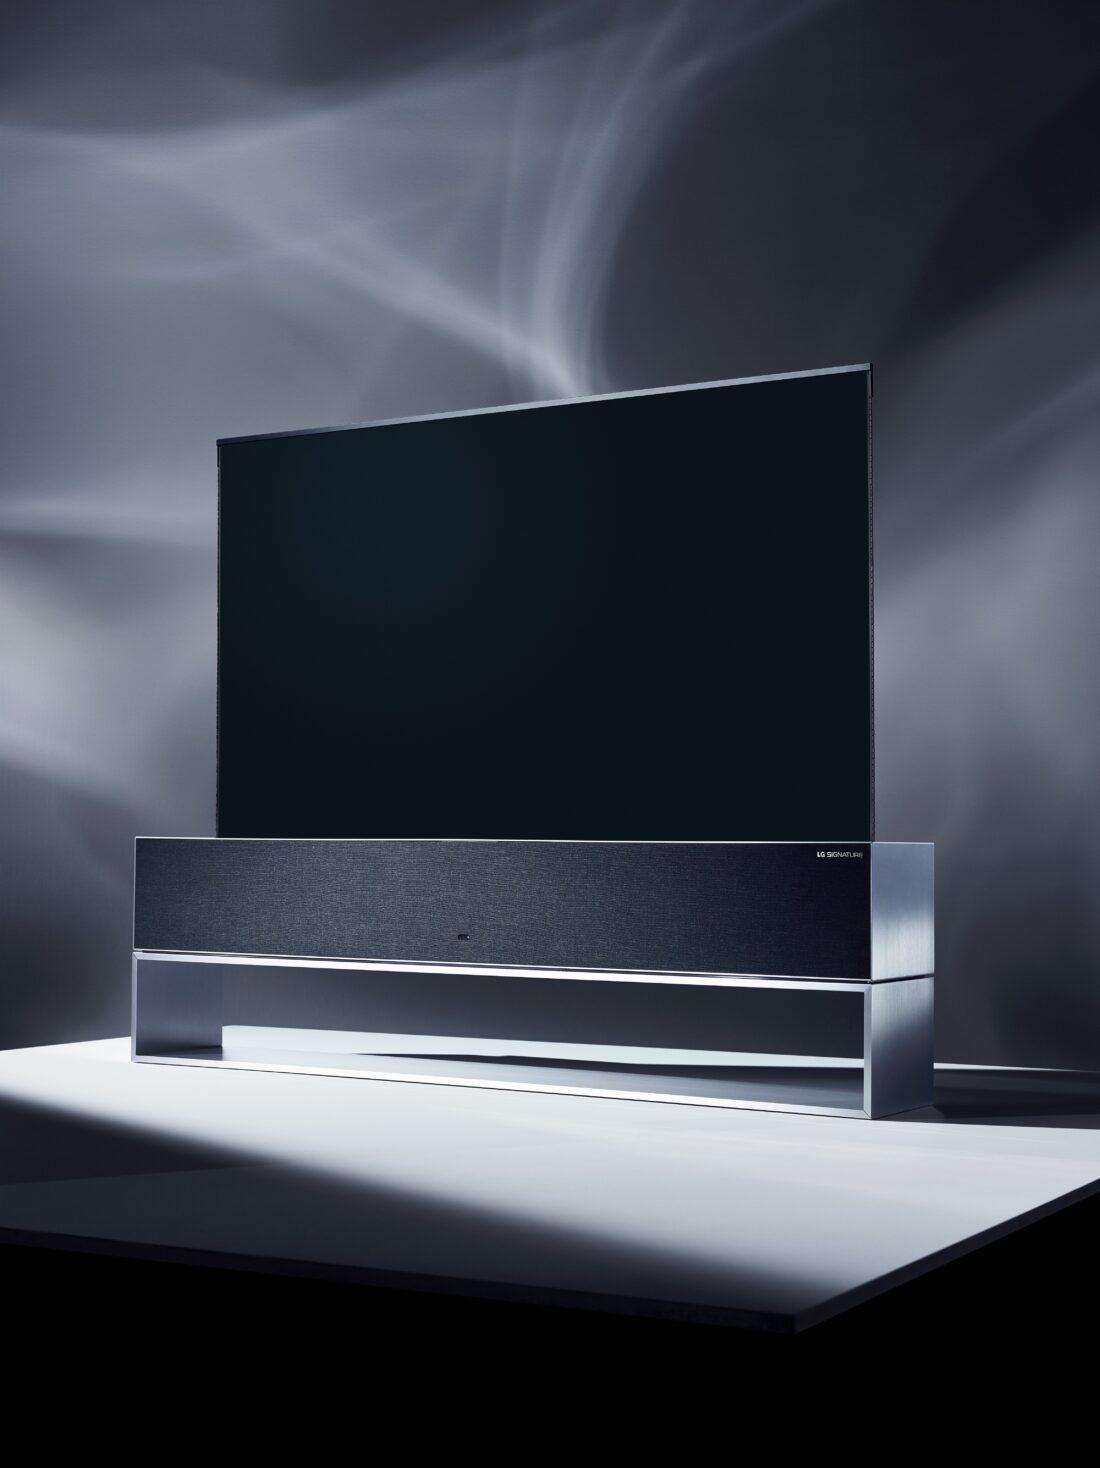 Concept image of the front LG SIGNATURE OLED TV R facing 10 degrees to the left at a darkened studio